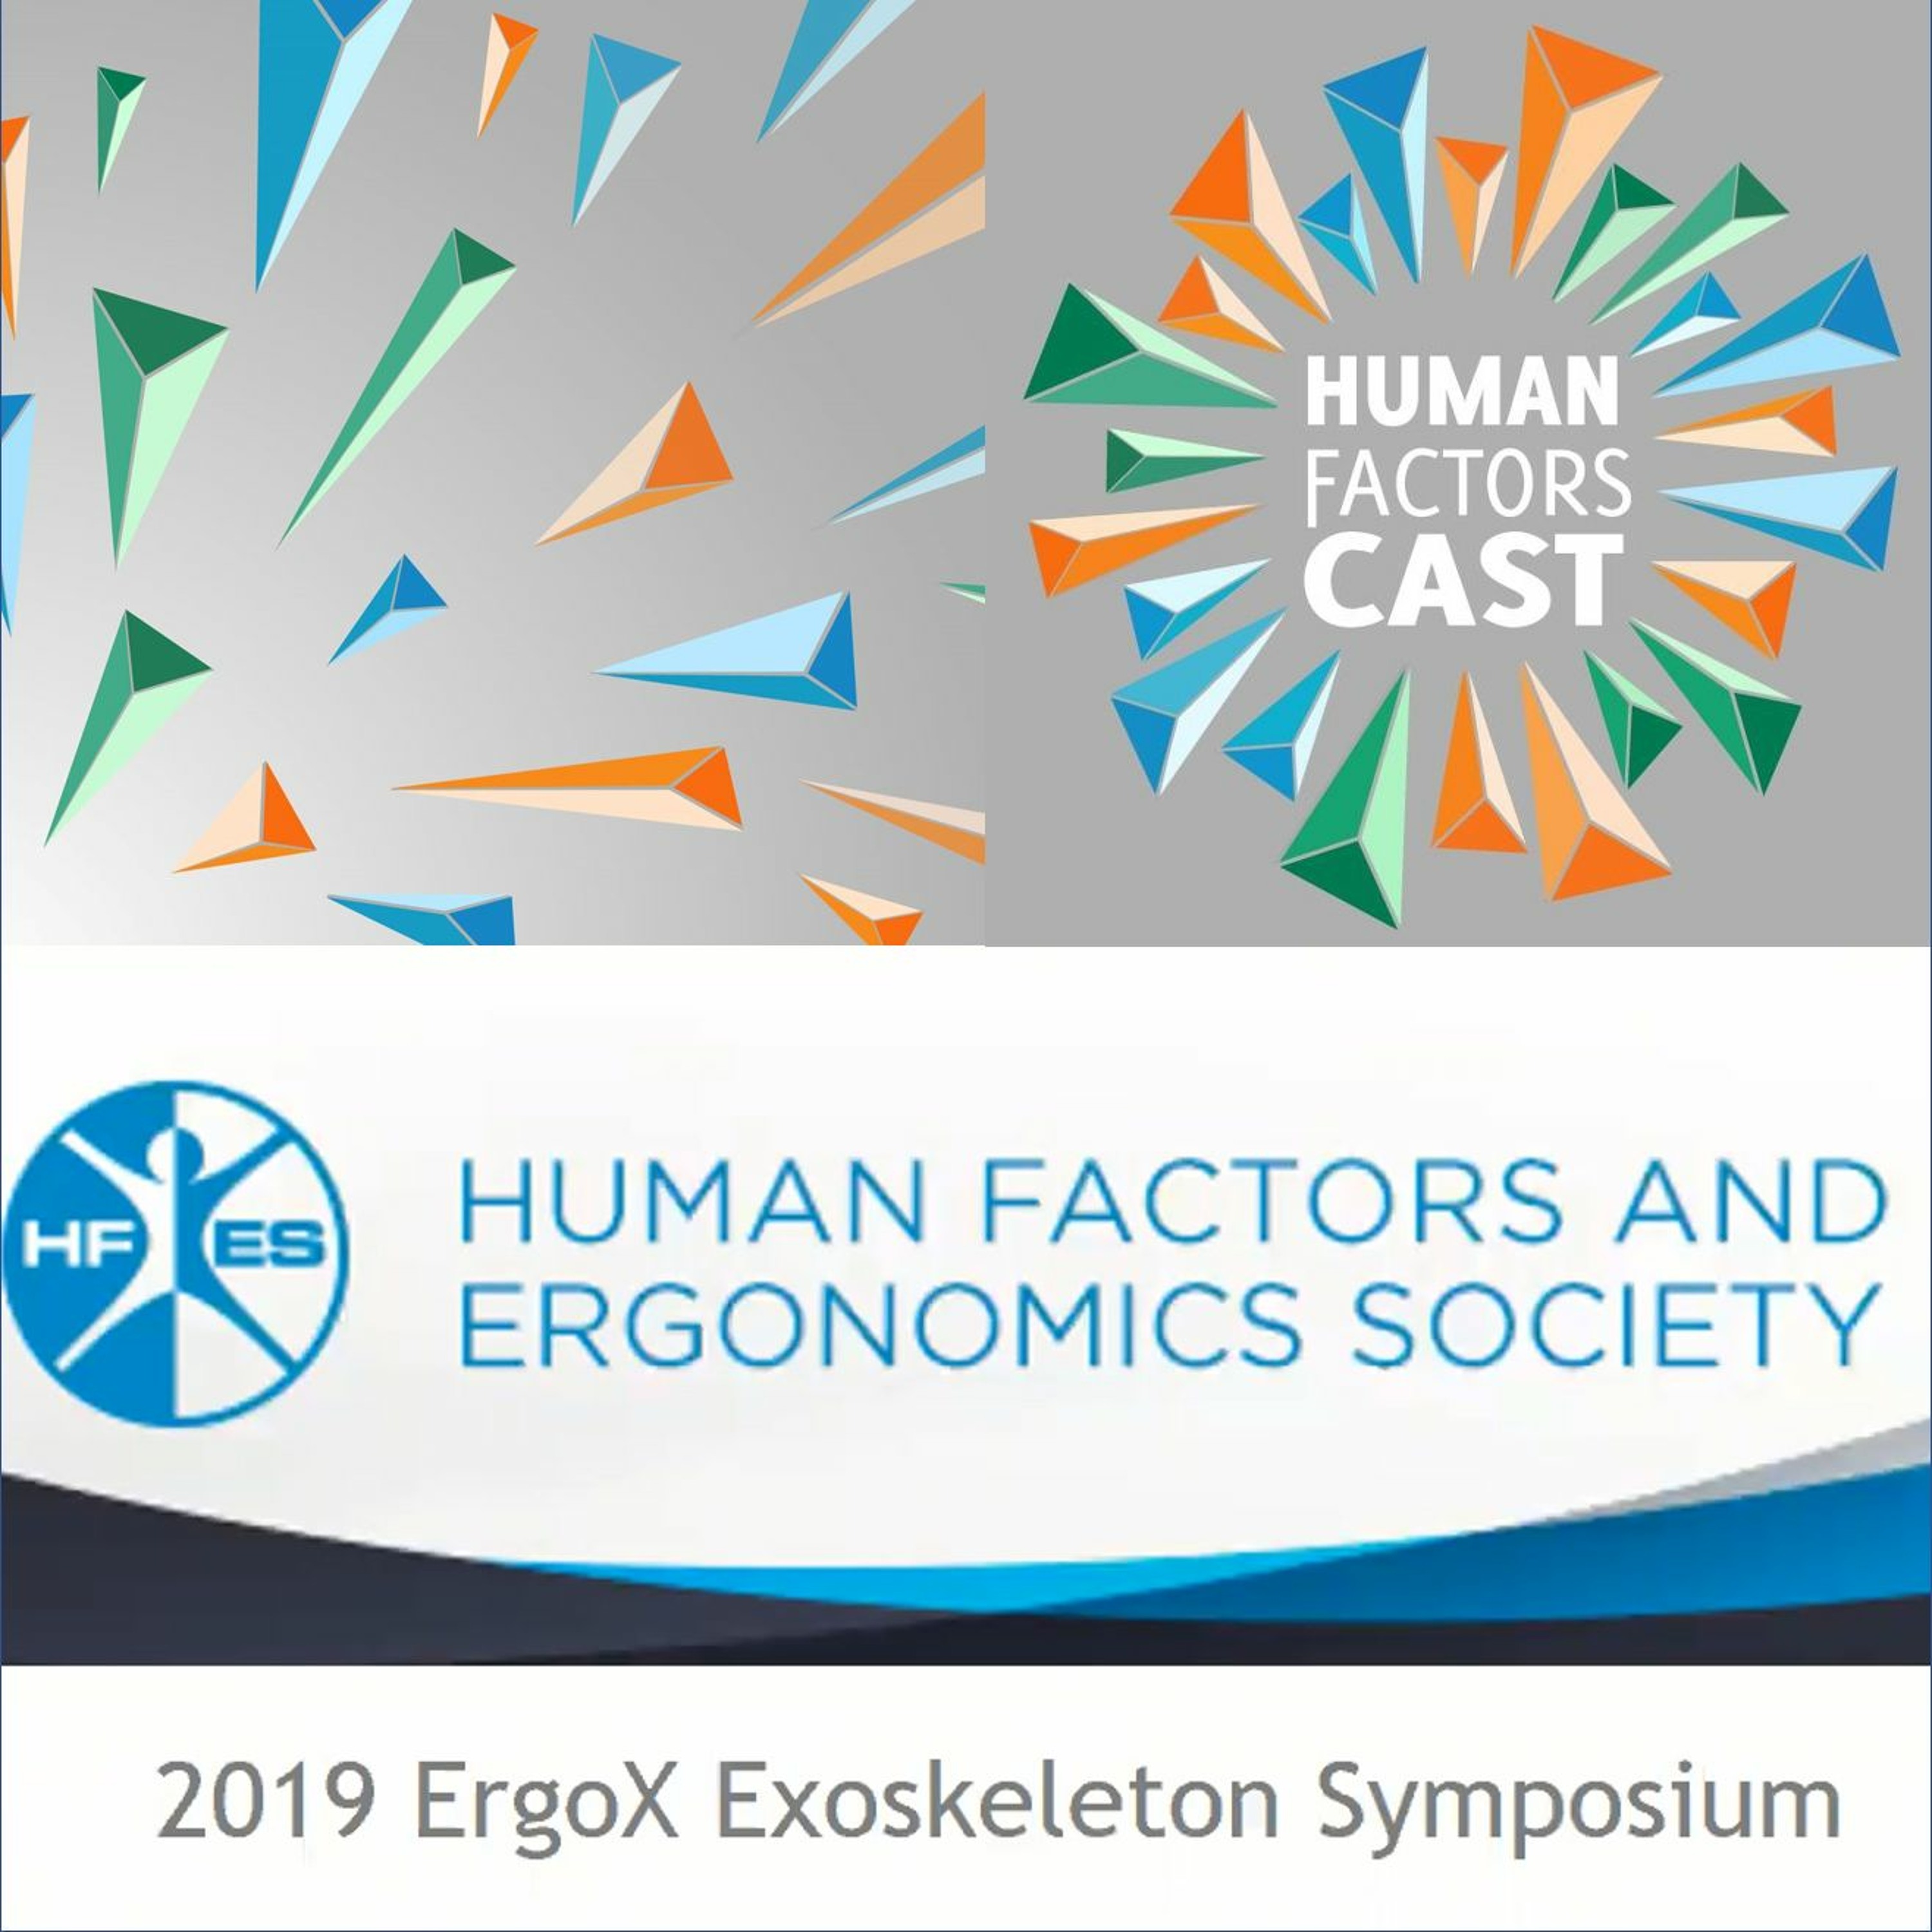 Bonus: A Preview of the 2019 ErgoX Exoskeleton Symposium: Exoskeletons in the Workplace and Beyond